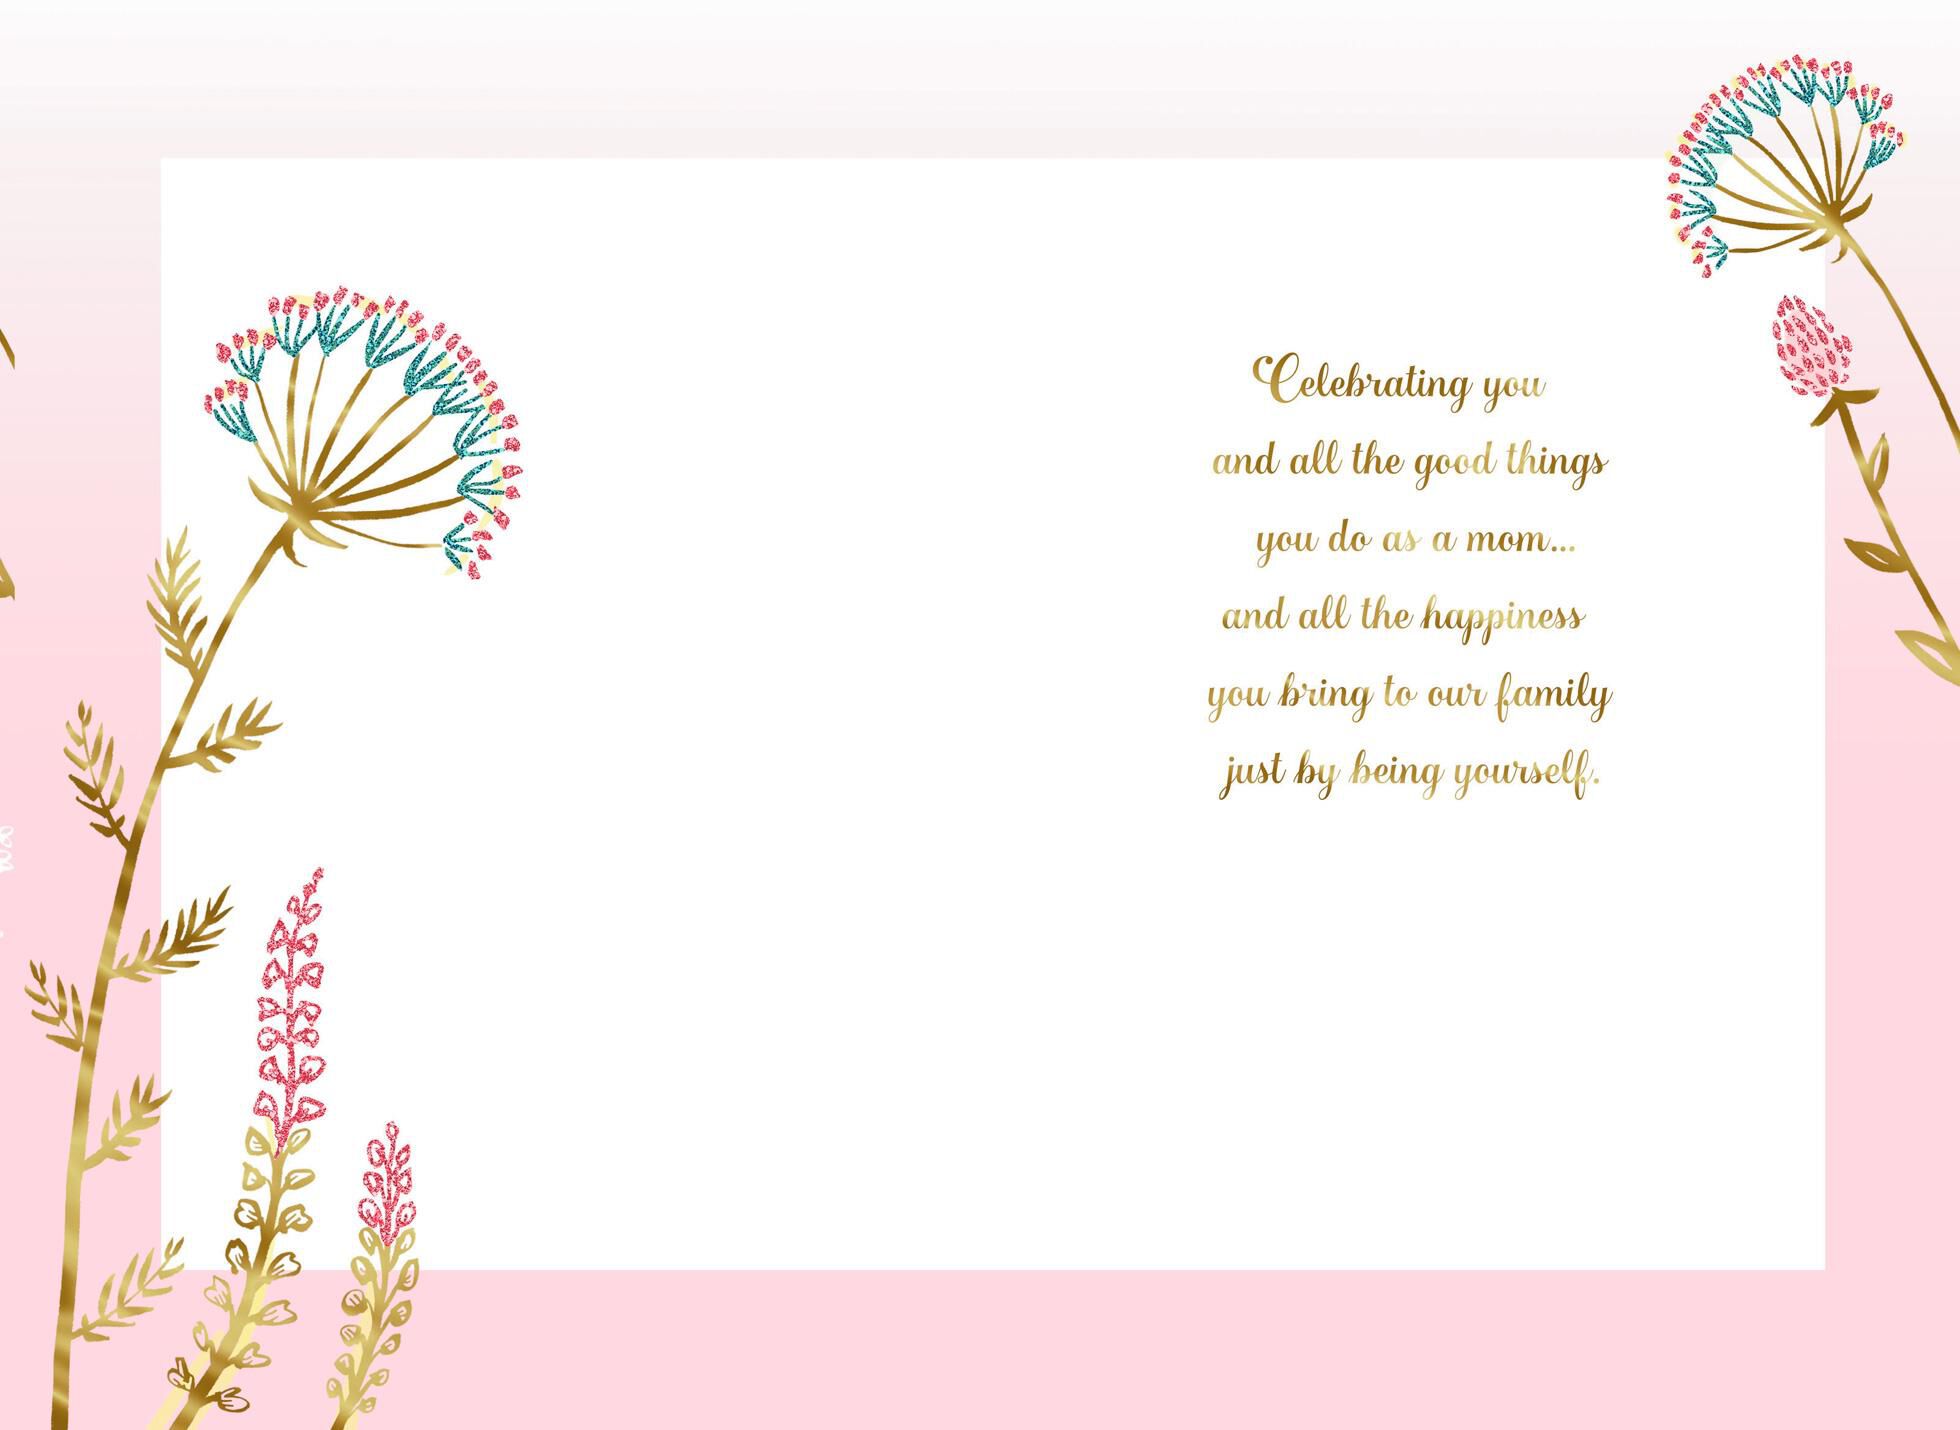 printable-mother-s-day-cards-for-kids